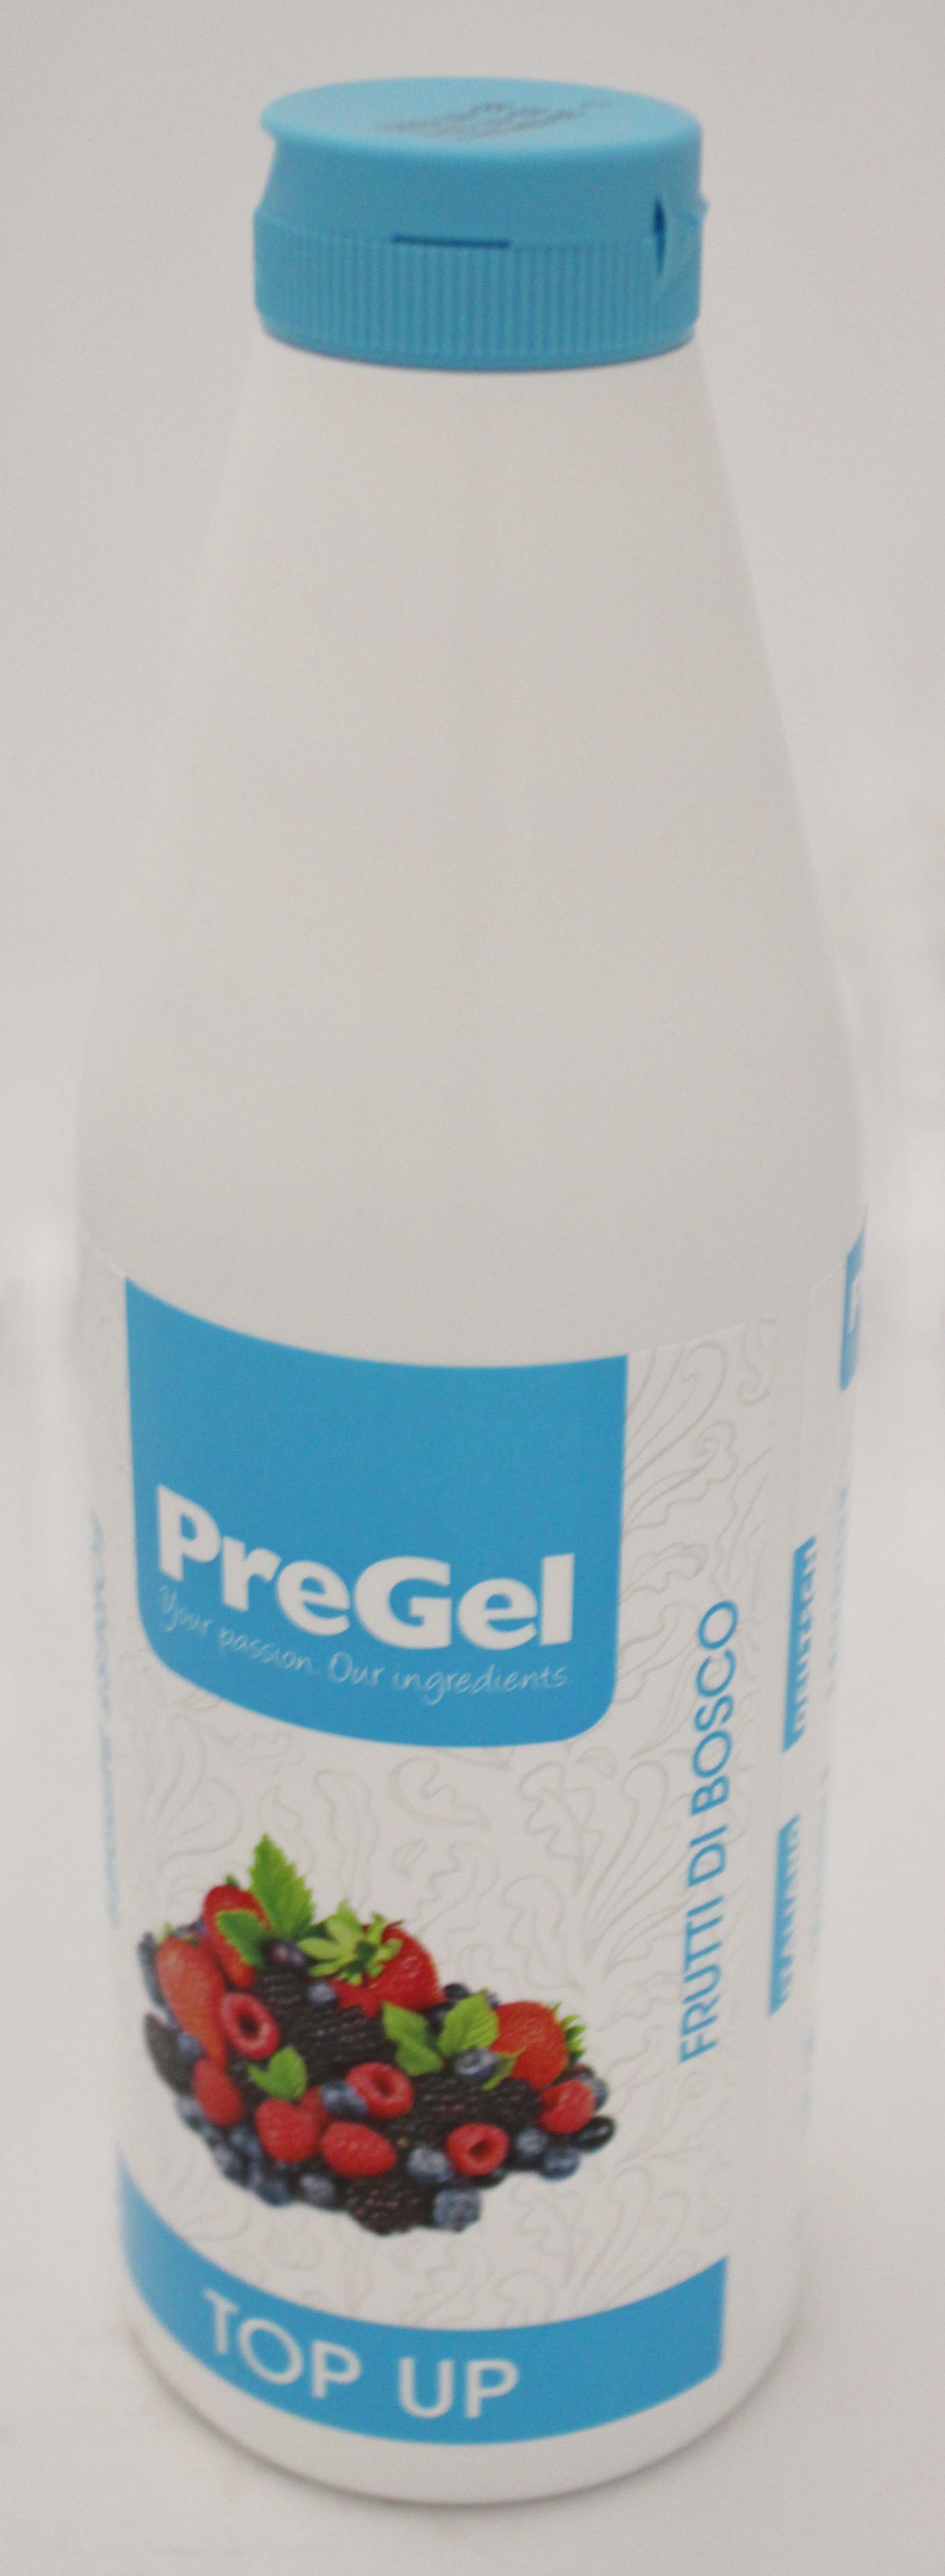 Pregel Waldbeer Topping 1l Flasche 11506